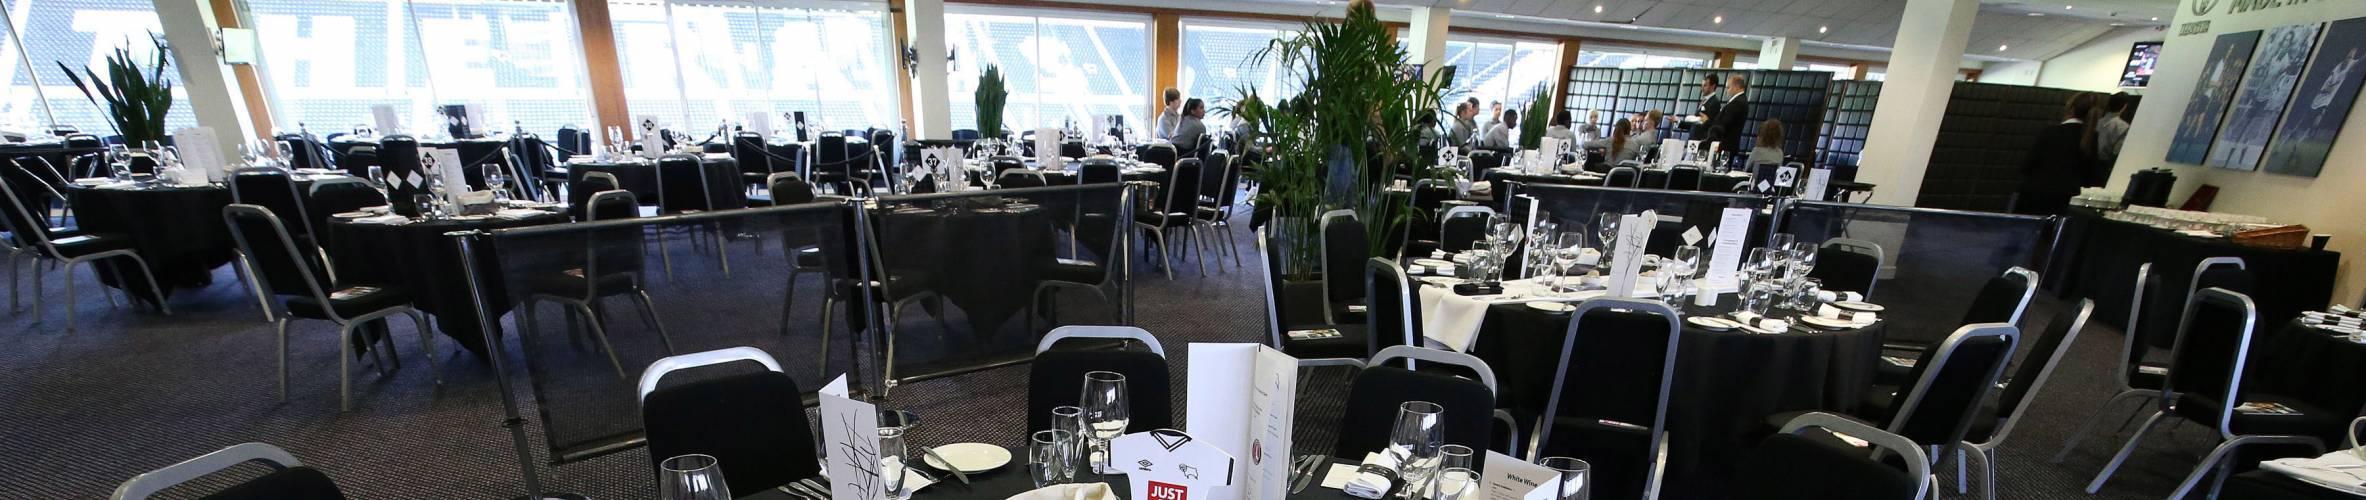 Toyota Suite, Derby County Football Club photo #1